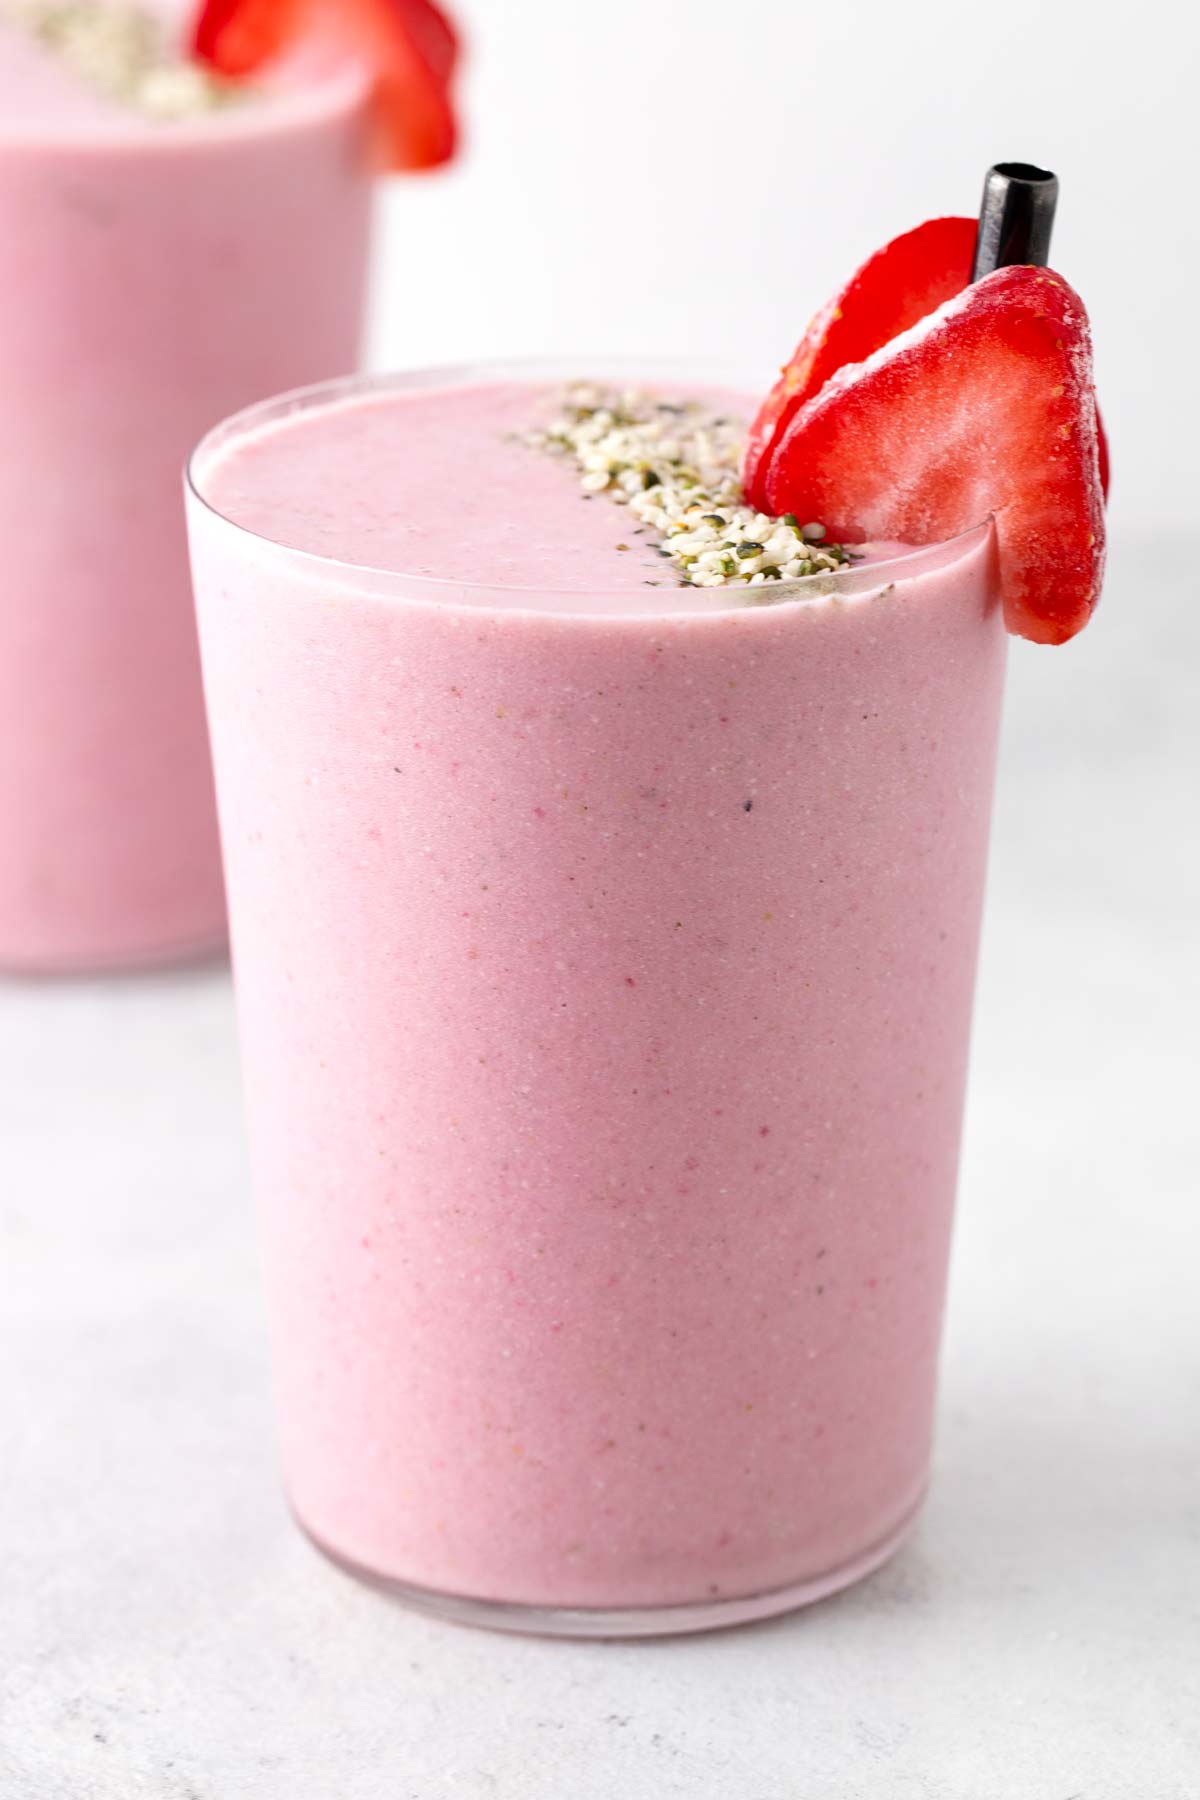 Strawberry Protein Smoothie in a glass.